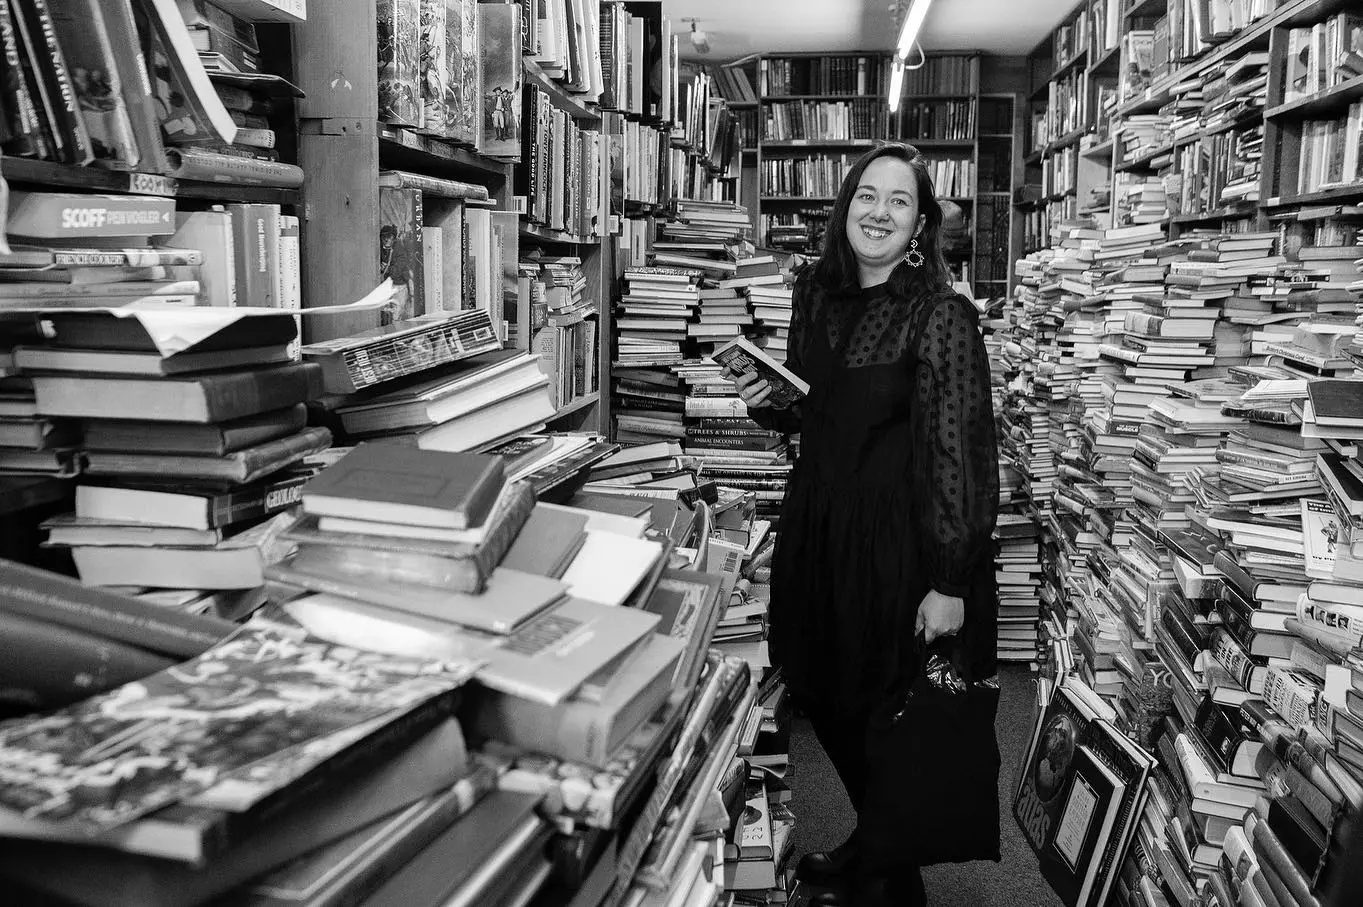 a black and white image of a person standing and smiling, surrounded by books